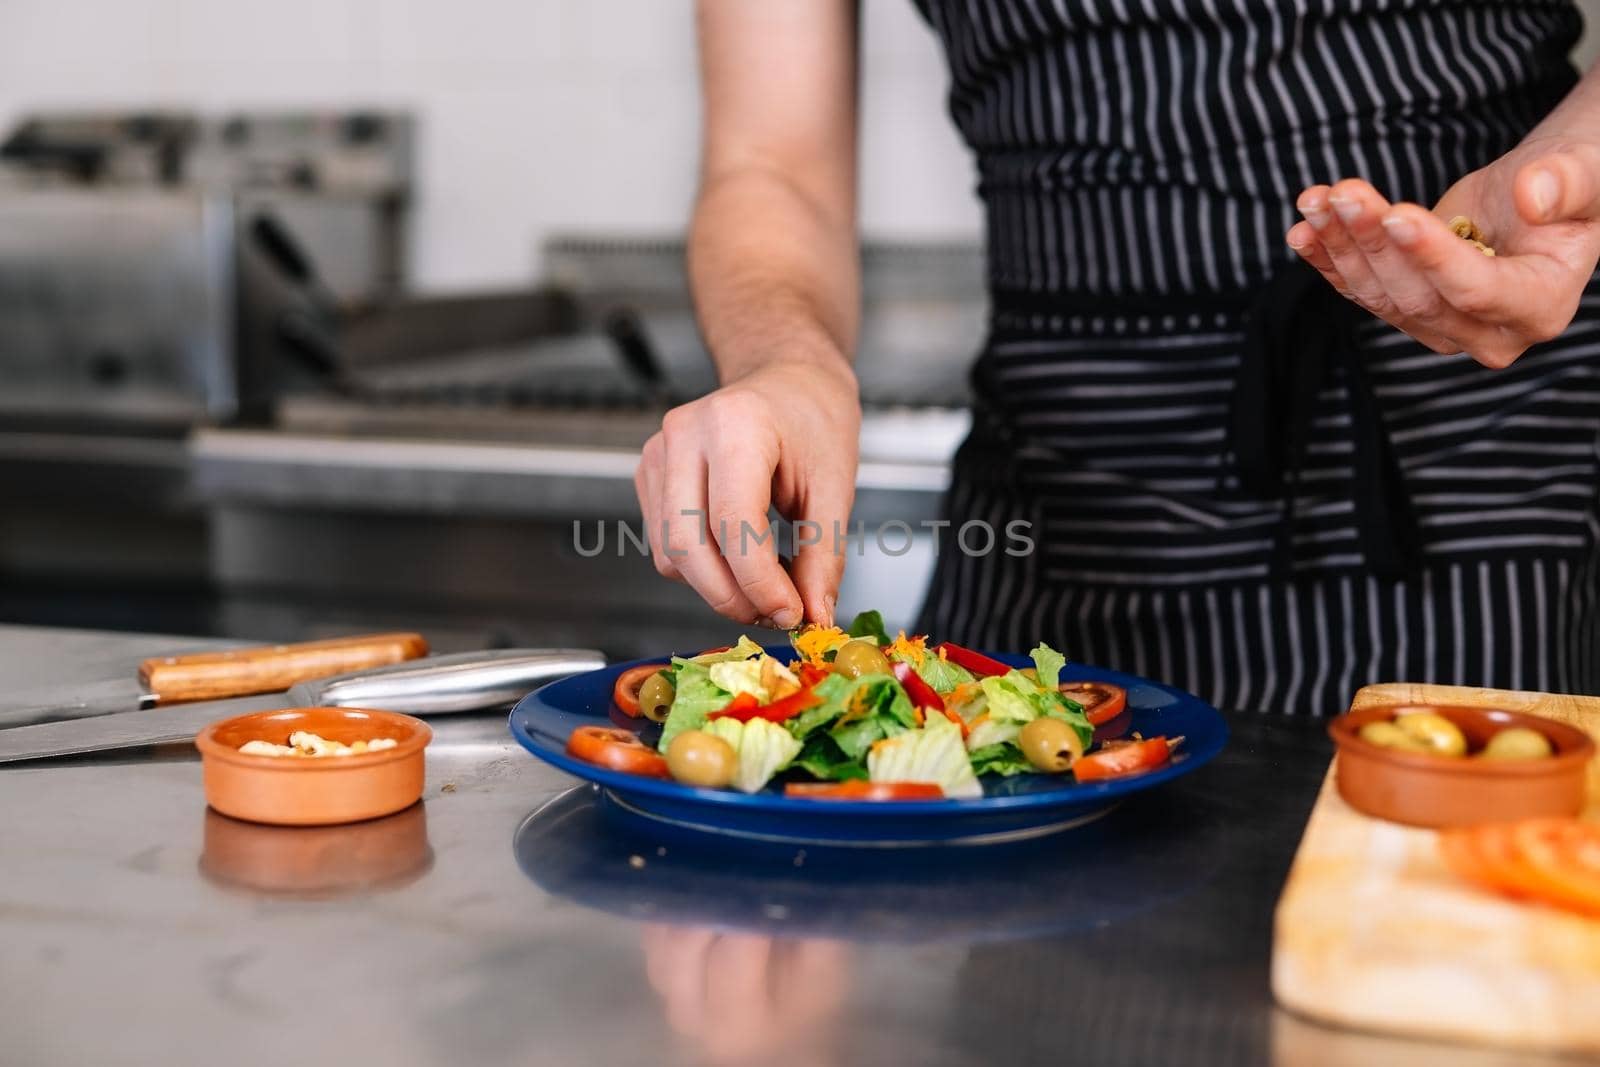 Detail of the hands of a young man, dressed in a black polo shirt and a dark striped apron, placing a salad on a blue plate in a professional kitchen, on a table full of food. The atmosphere is cold and clean, with the backdrop of professional aluminium tables and the fires of the restaurant kitchen.